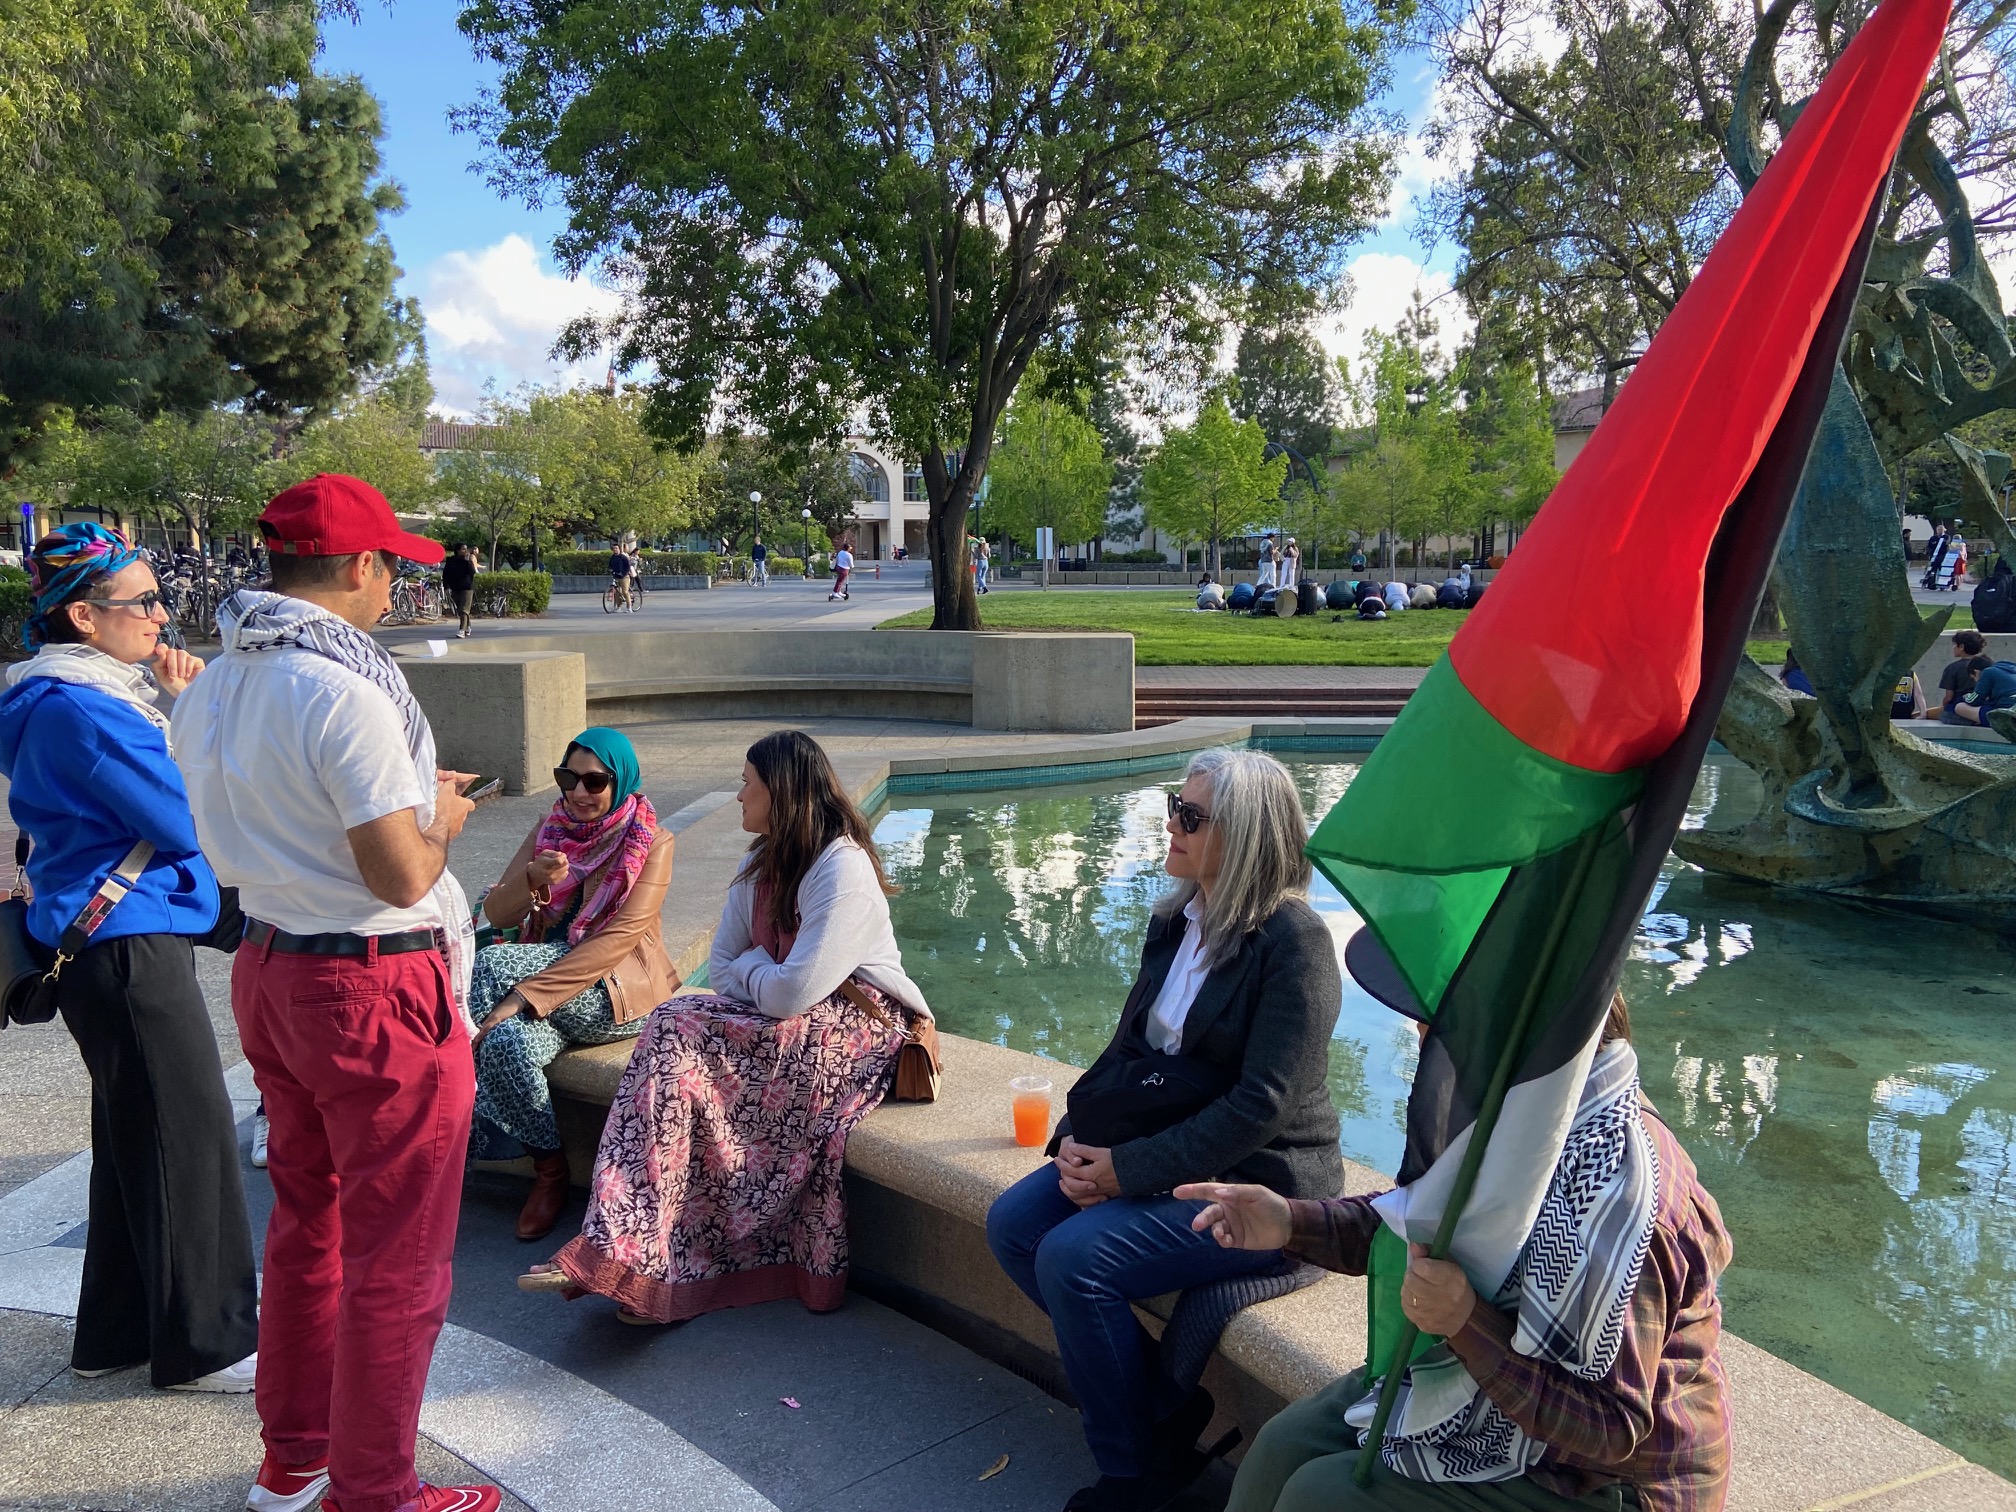 6 people rest on wall of fountain, one carries a Palestinian flag they are chatting